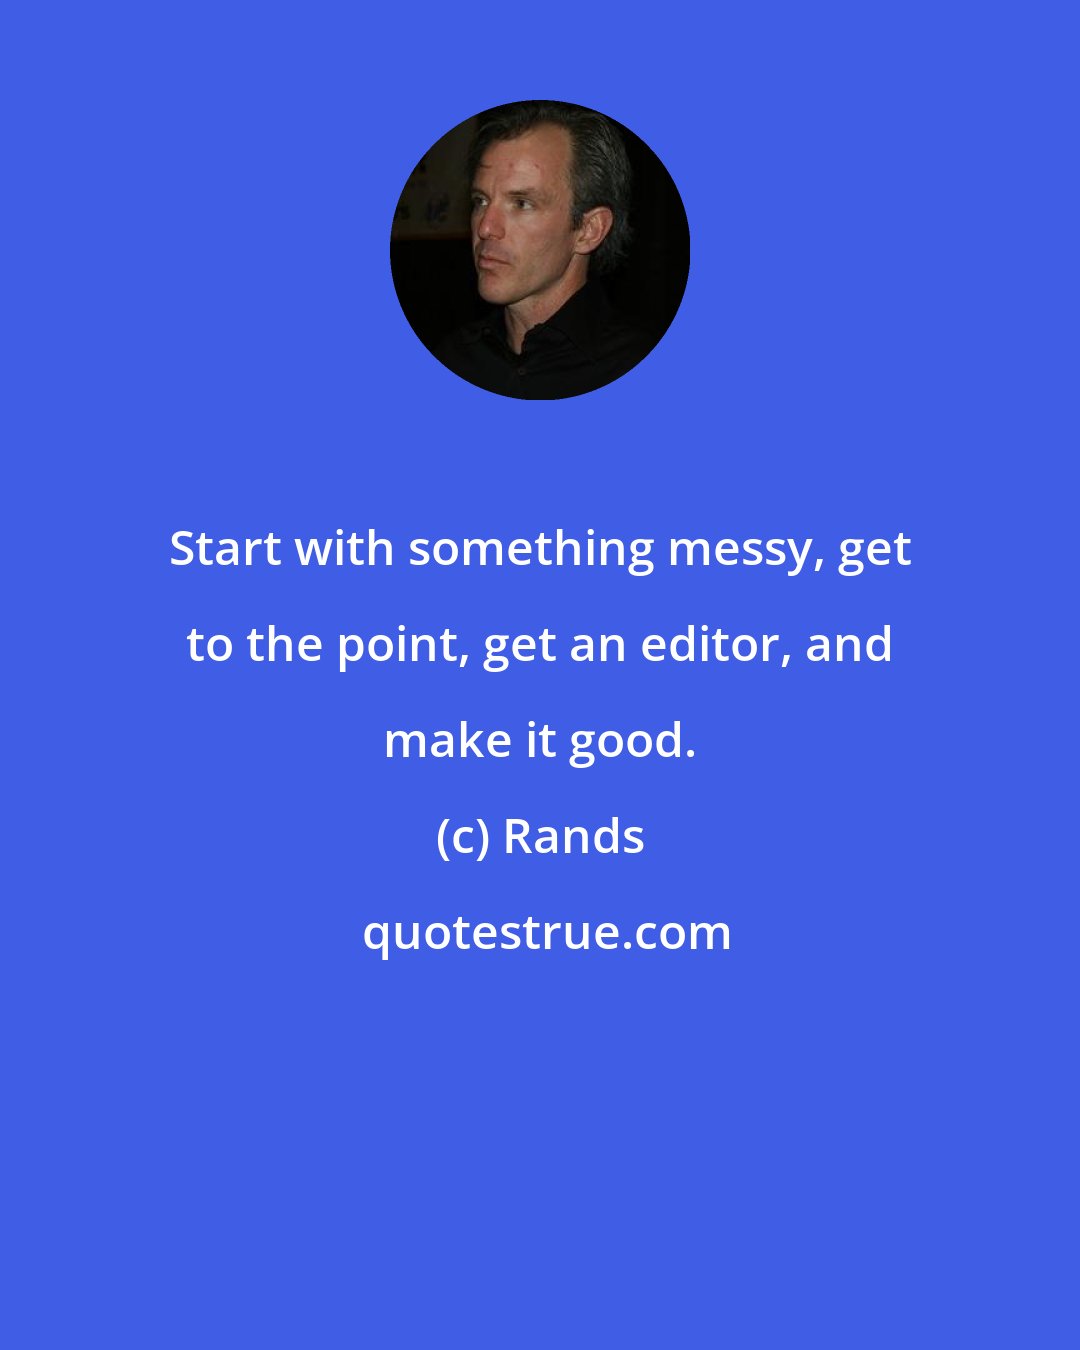 Rands: Start with something messy, get to the point, get an editor, and make it good.